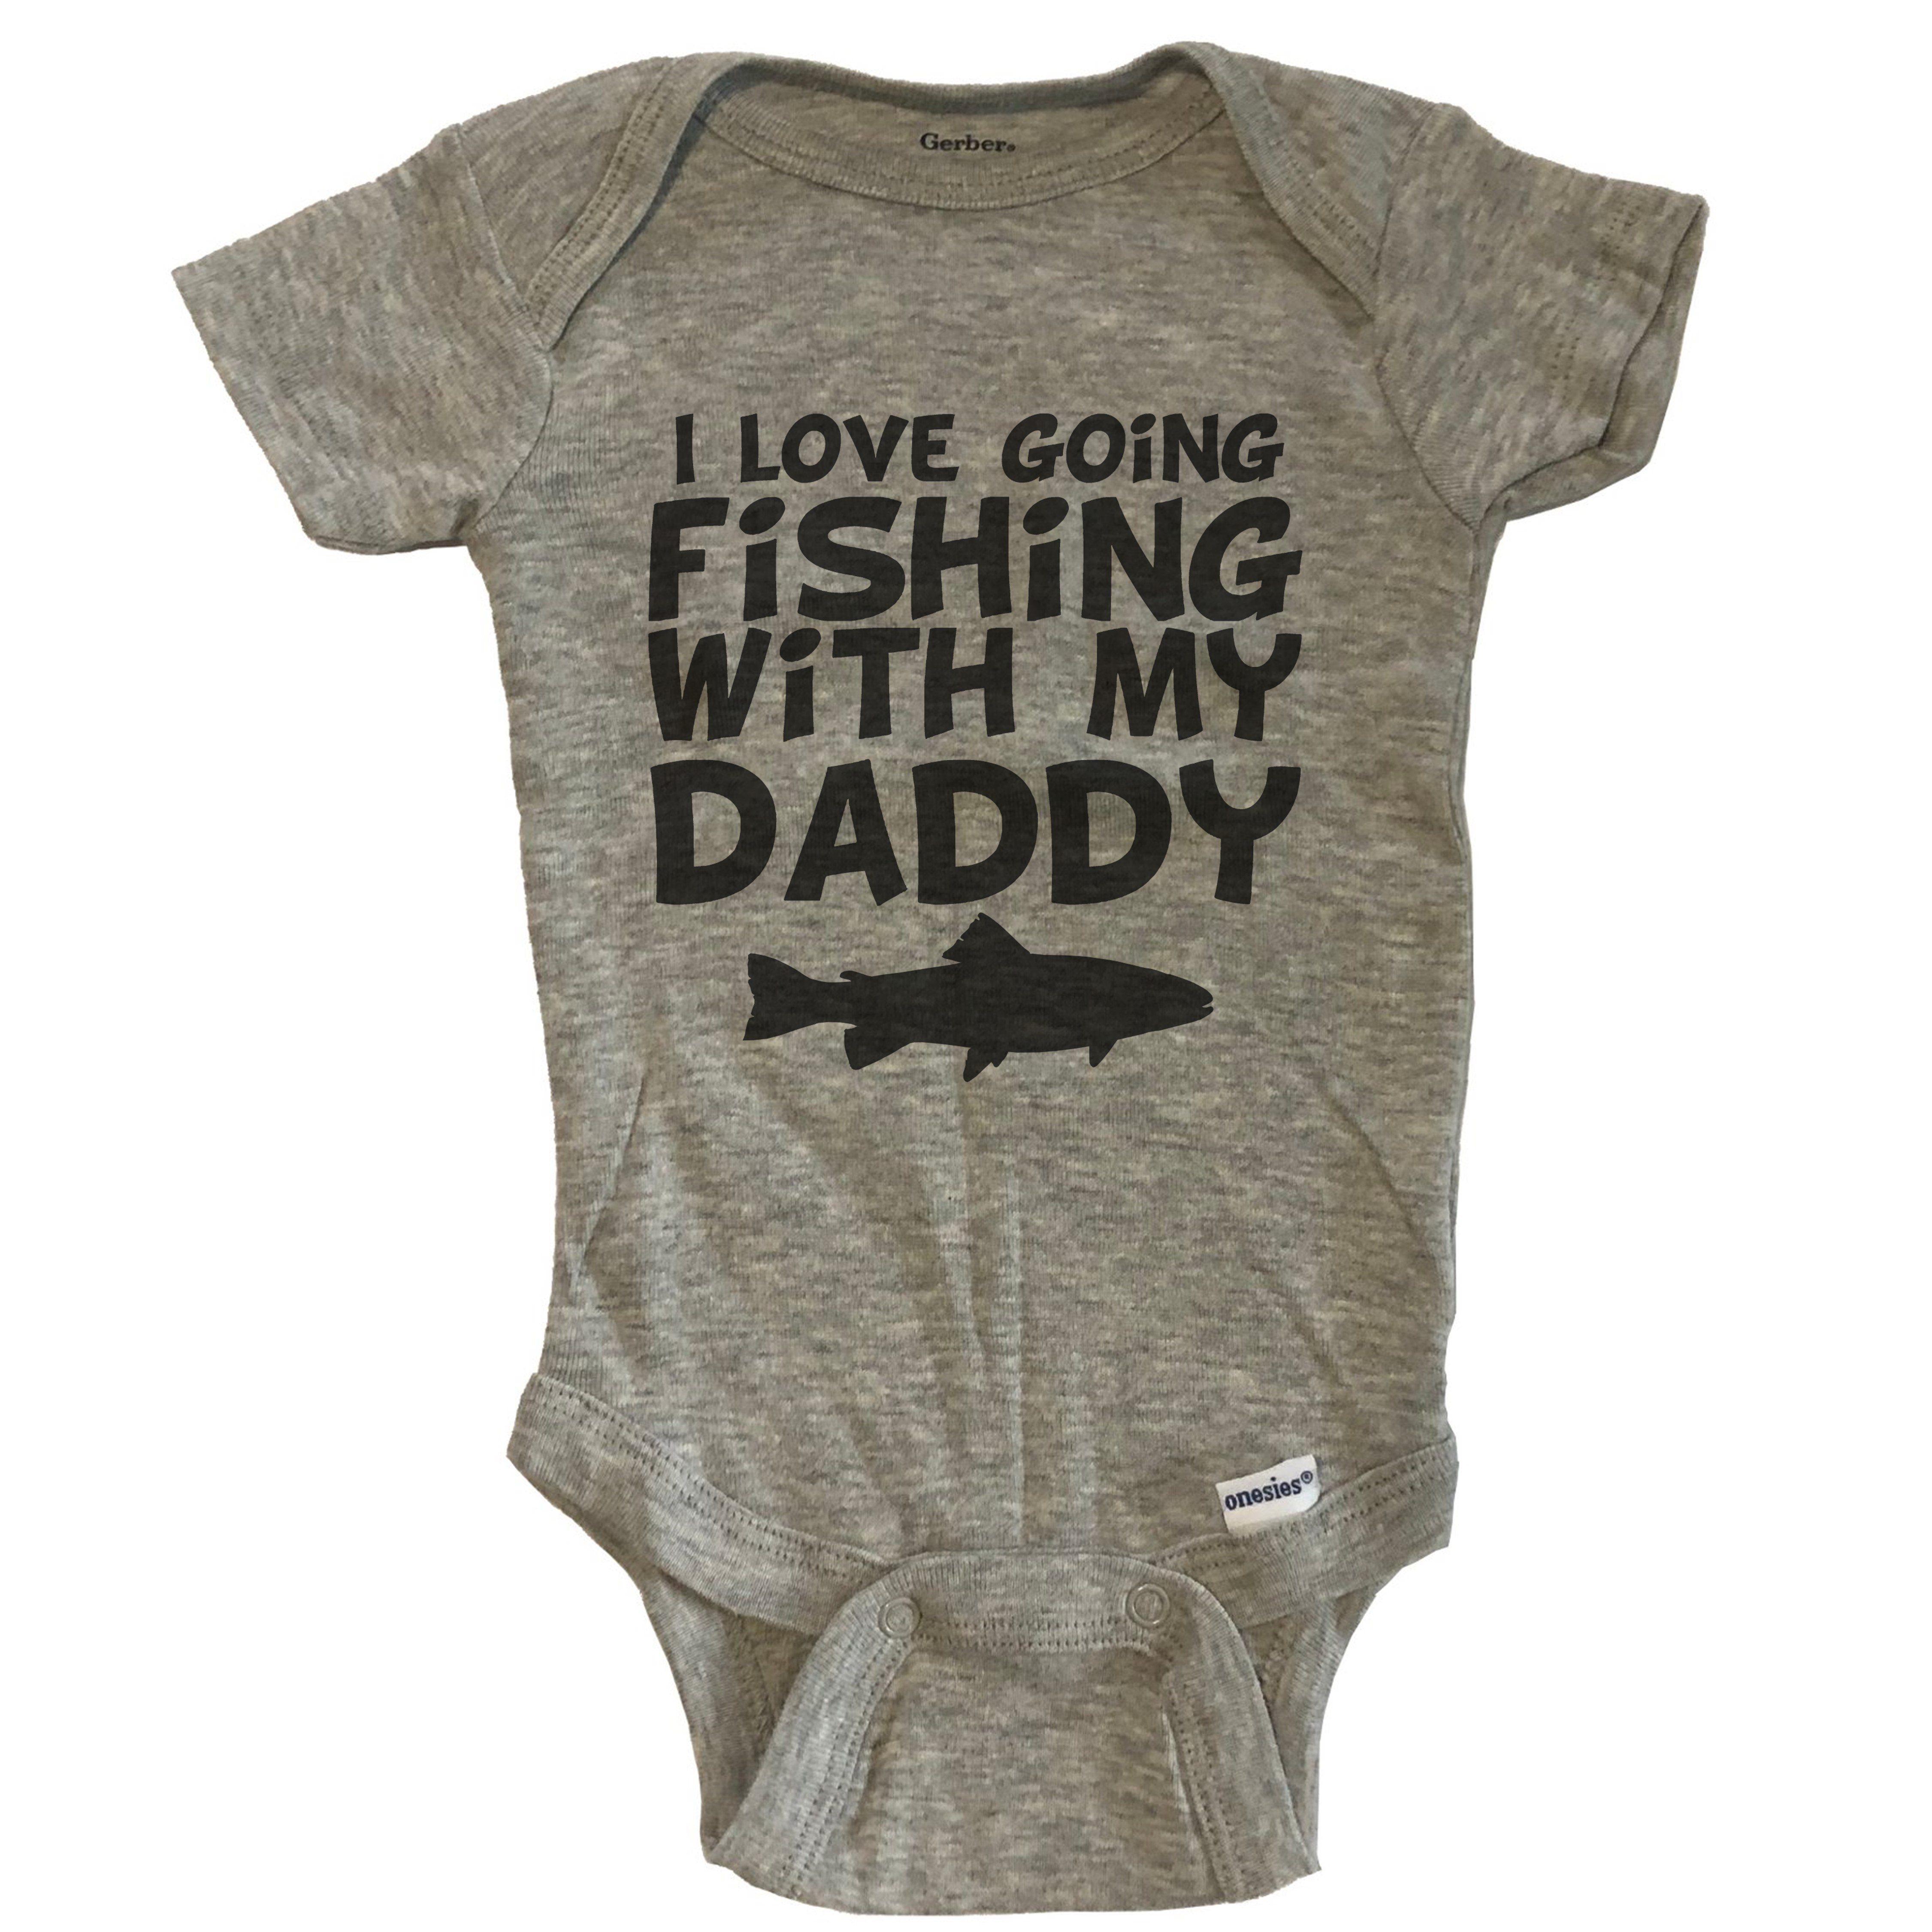 I Love Going Fishing with My Daddy Baby Onesie 6-9 Months / Grey